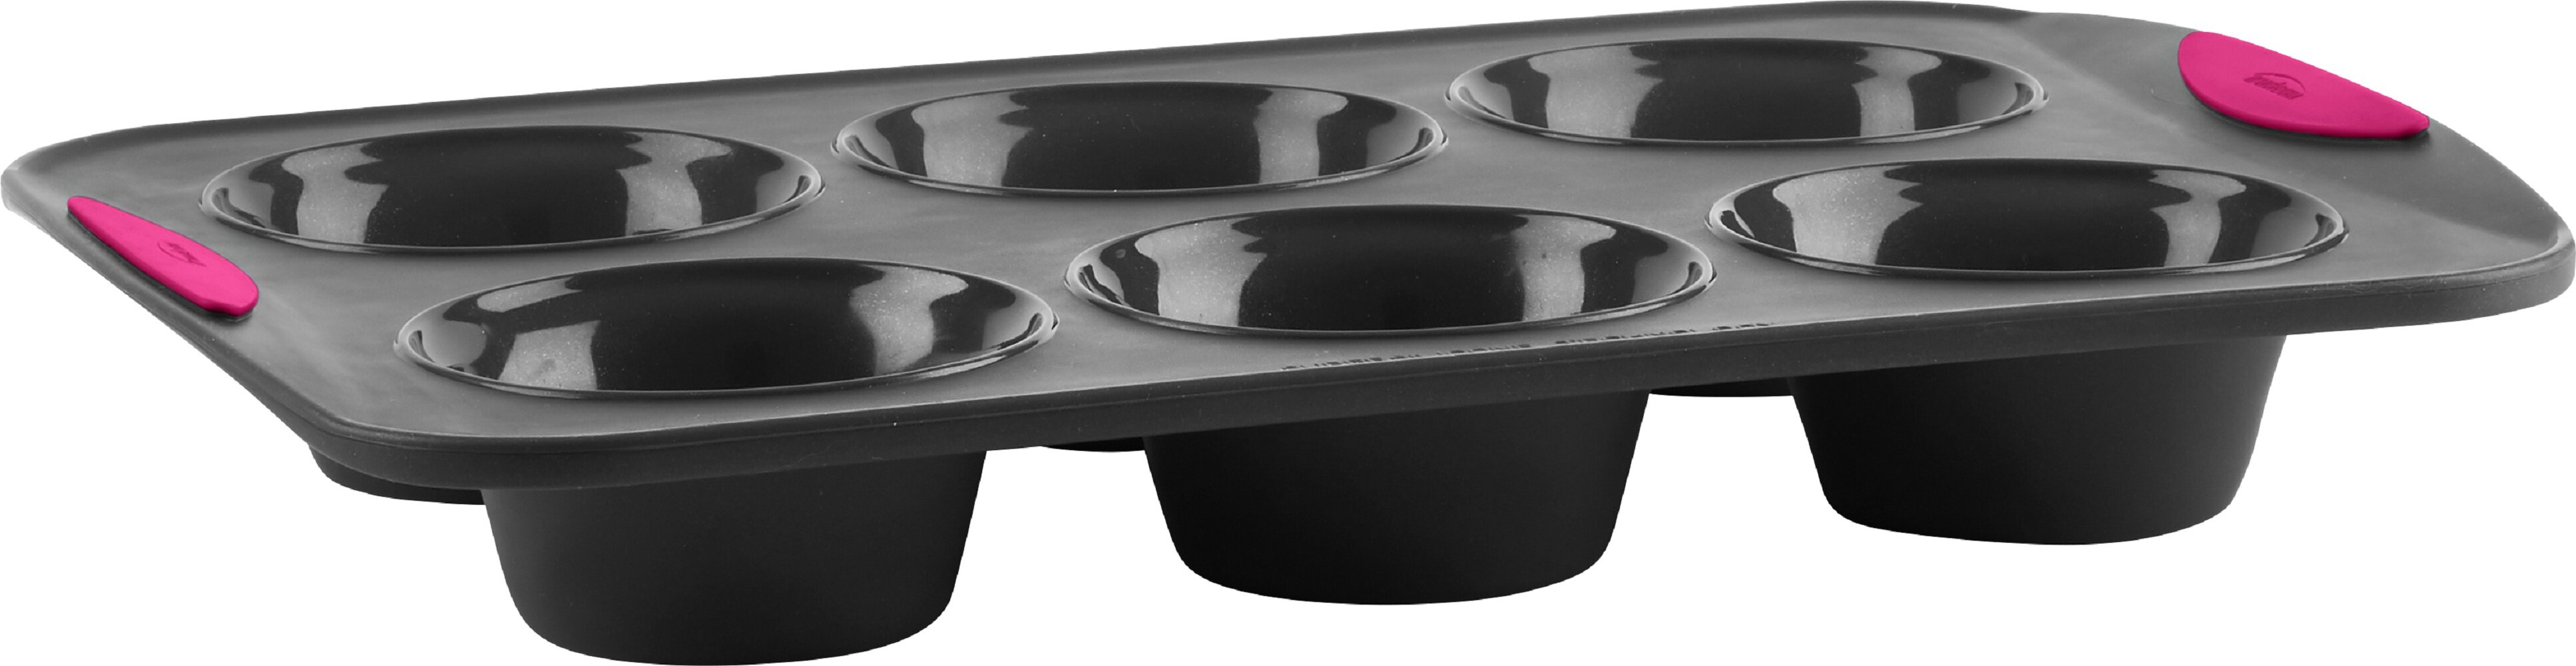 Trudeau 6 Cup Non-Stick Silicone Muffin Pan with Lid